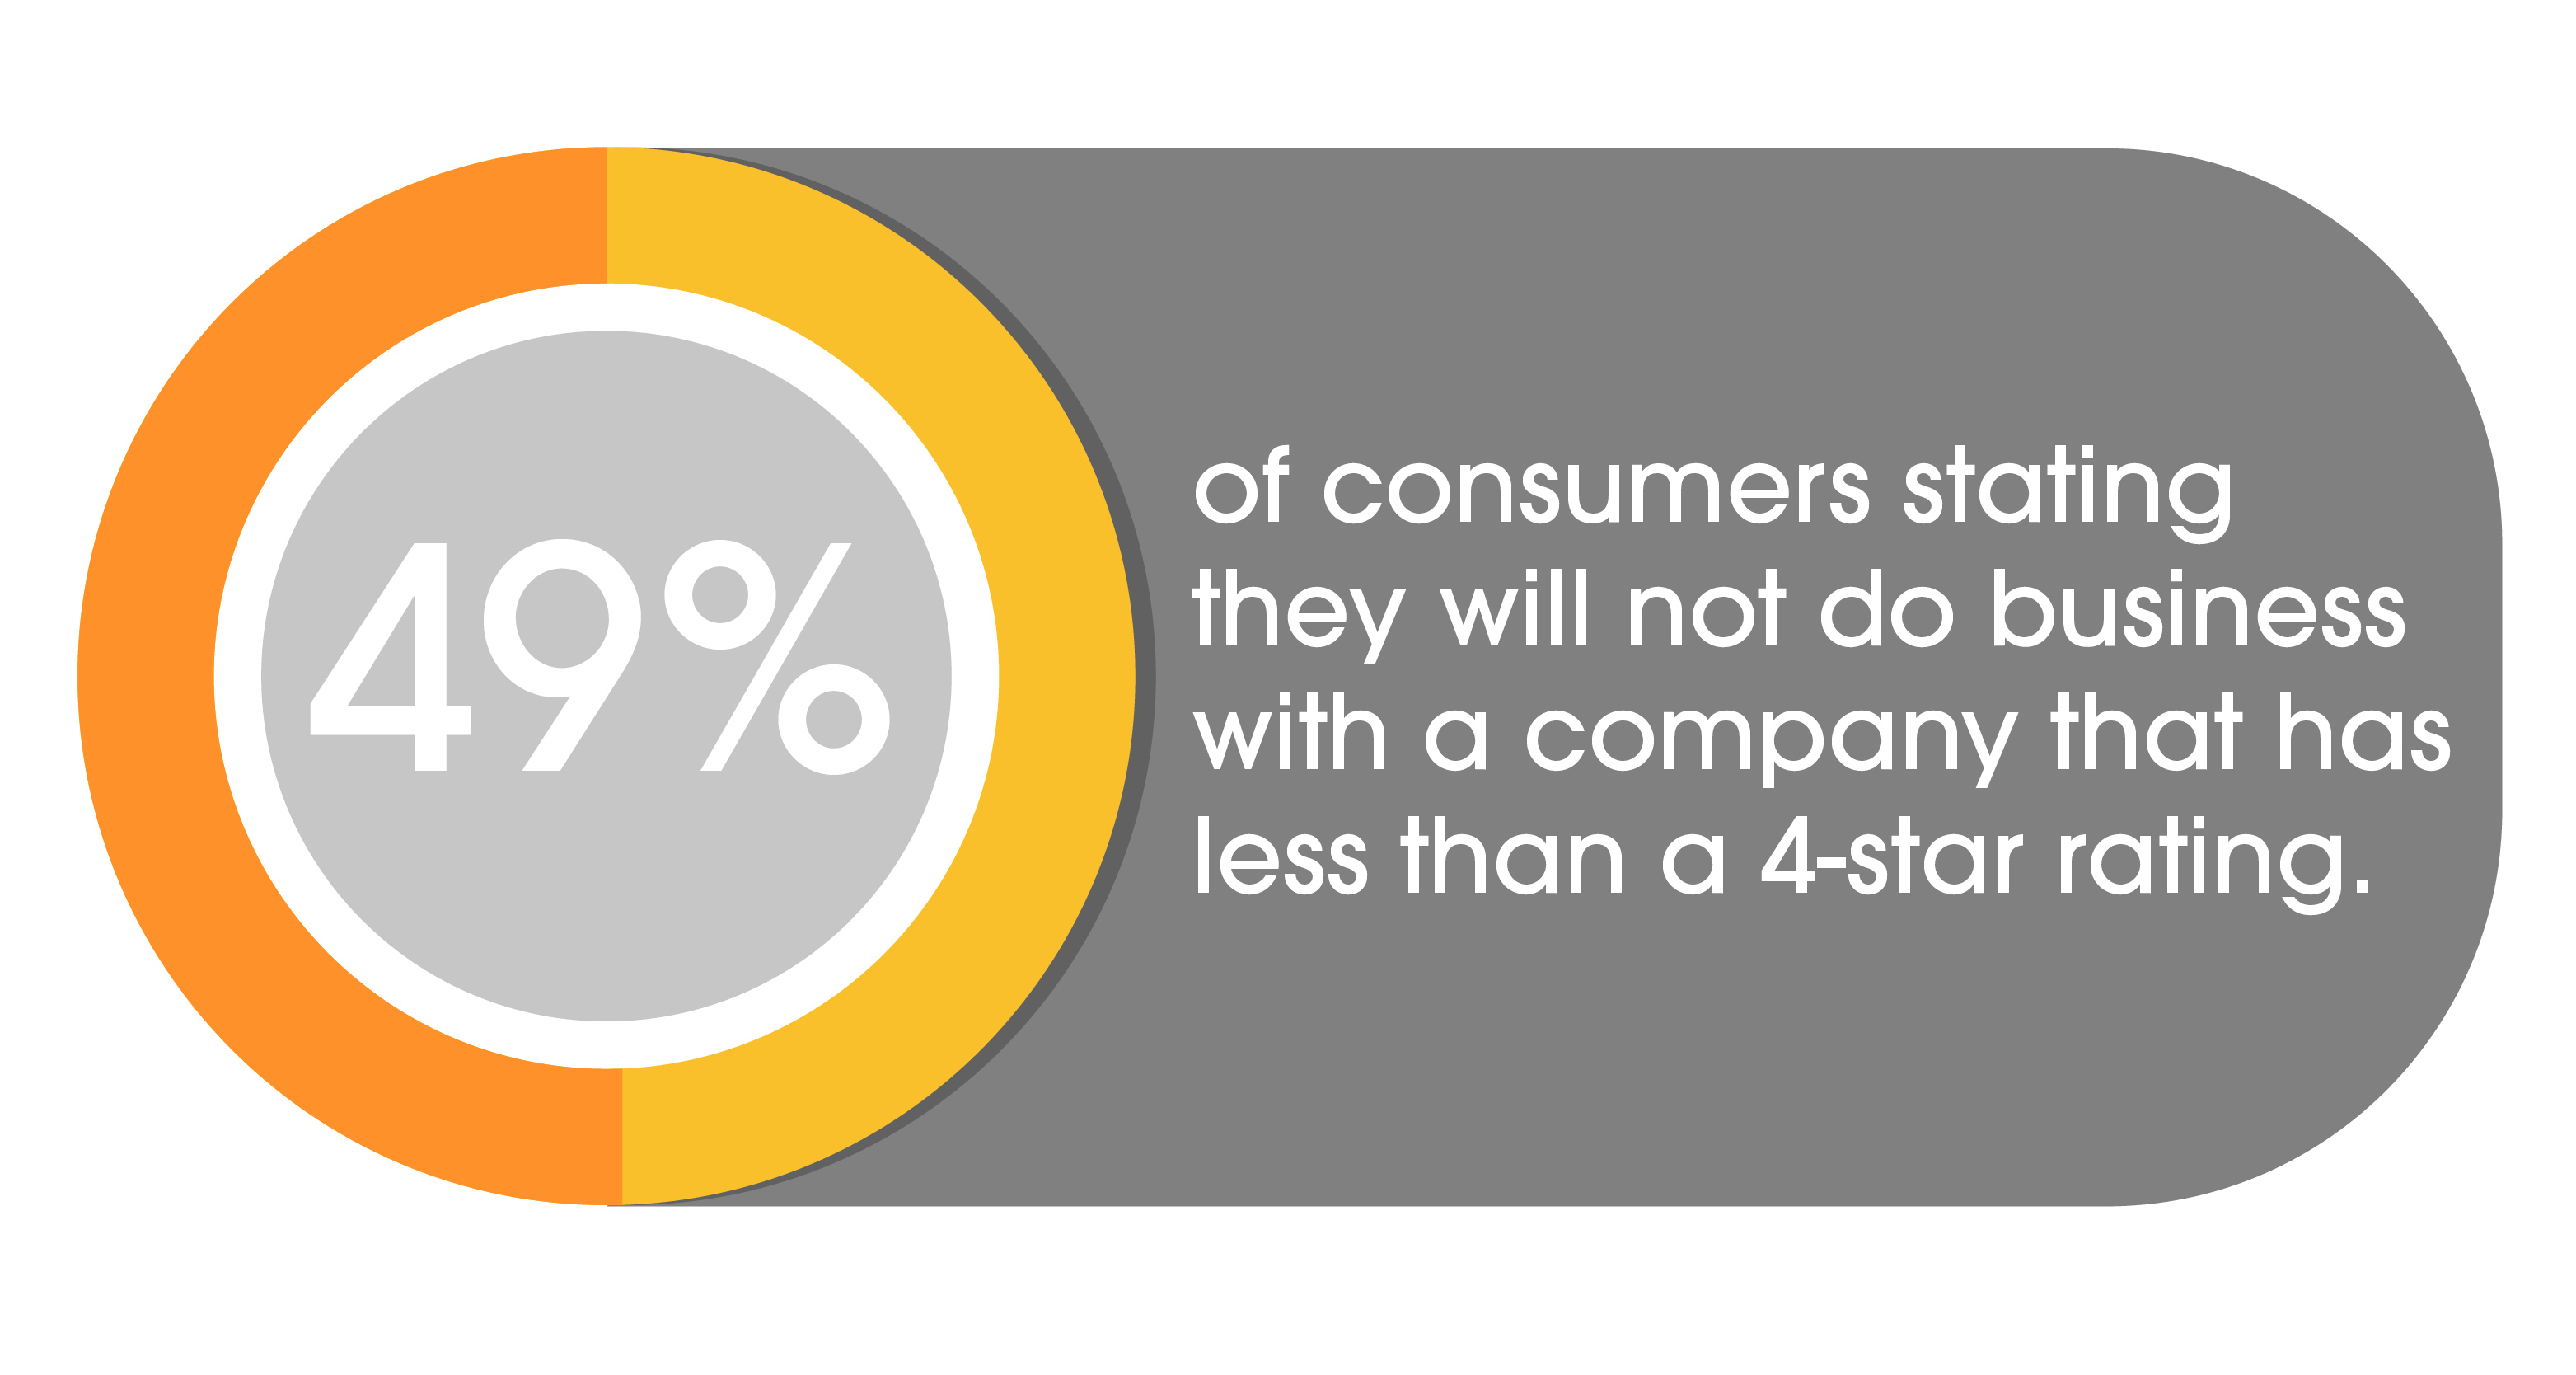 49% of consumers stating they will not do business with company with less than 4-star rating